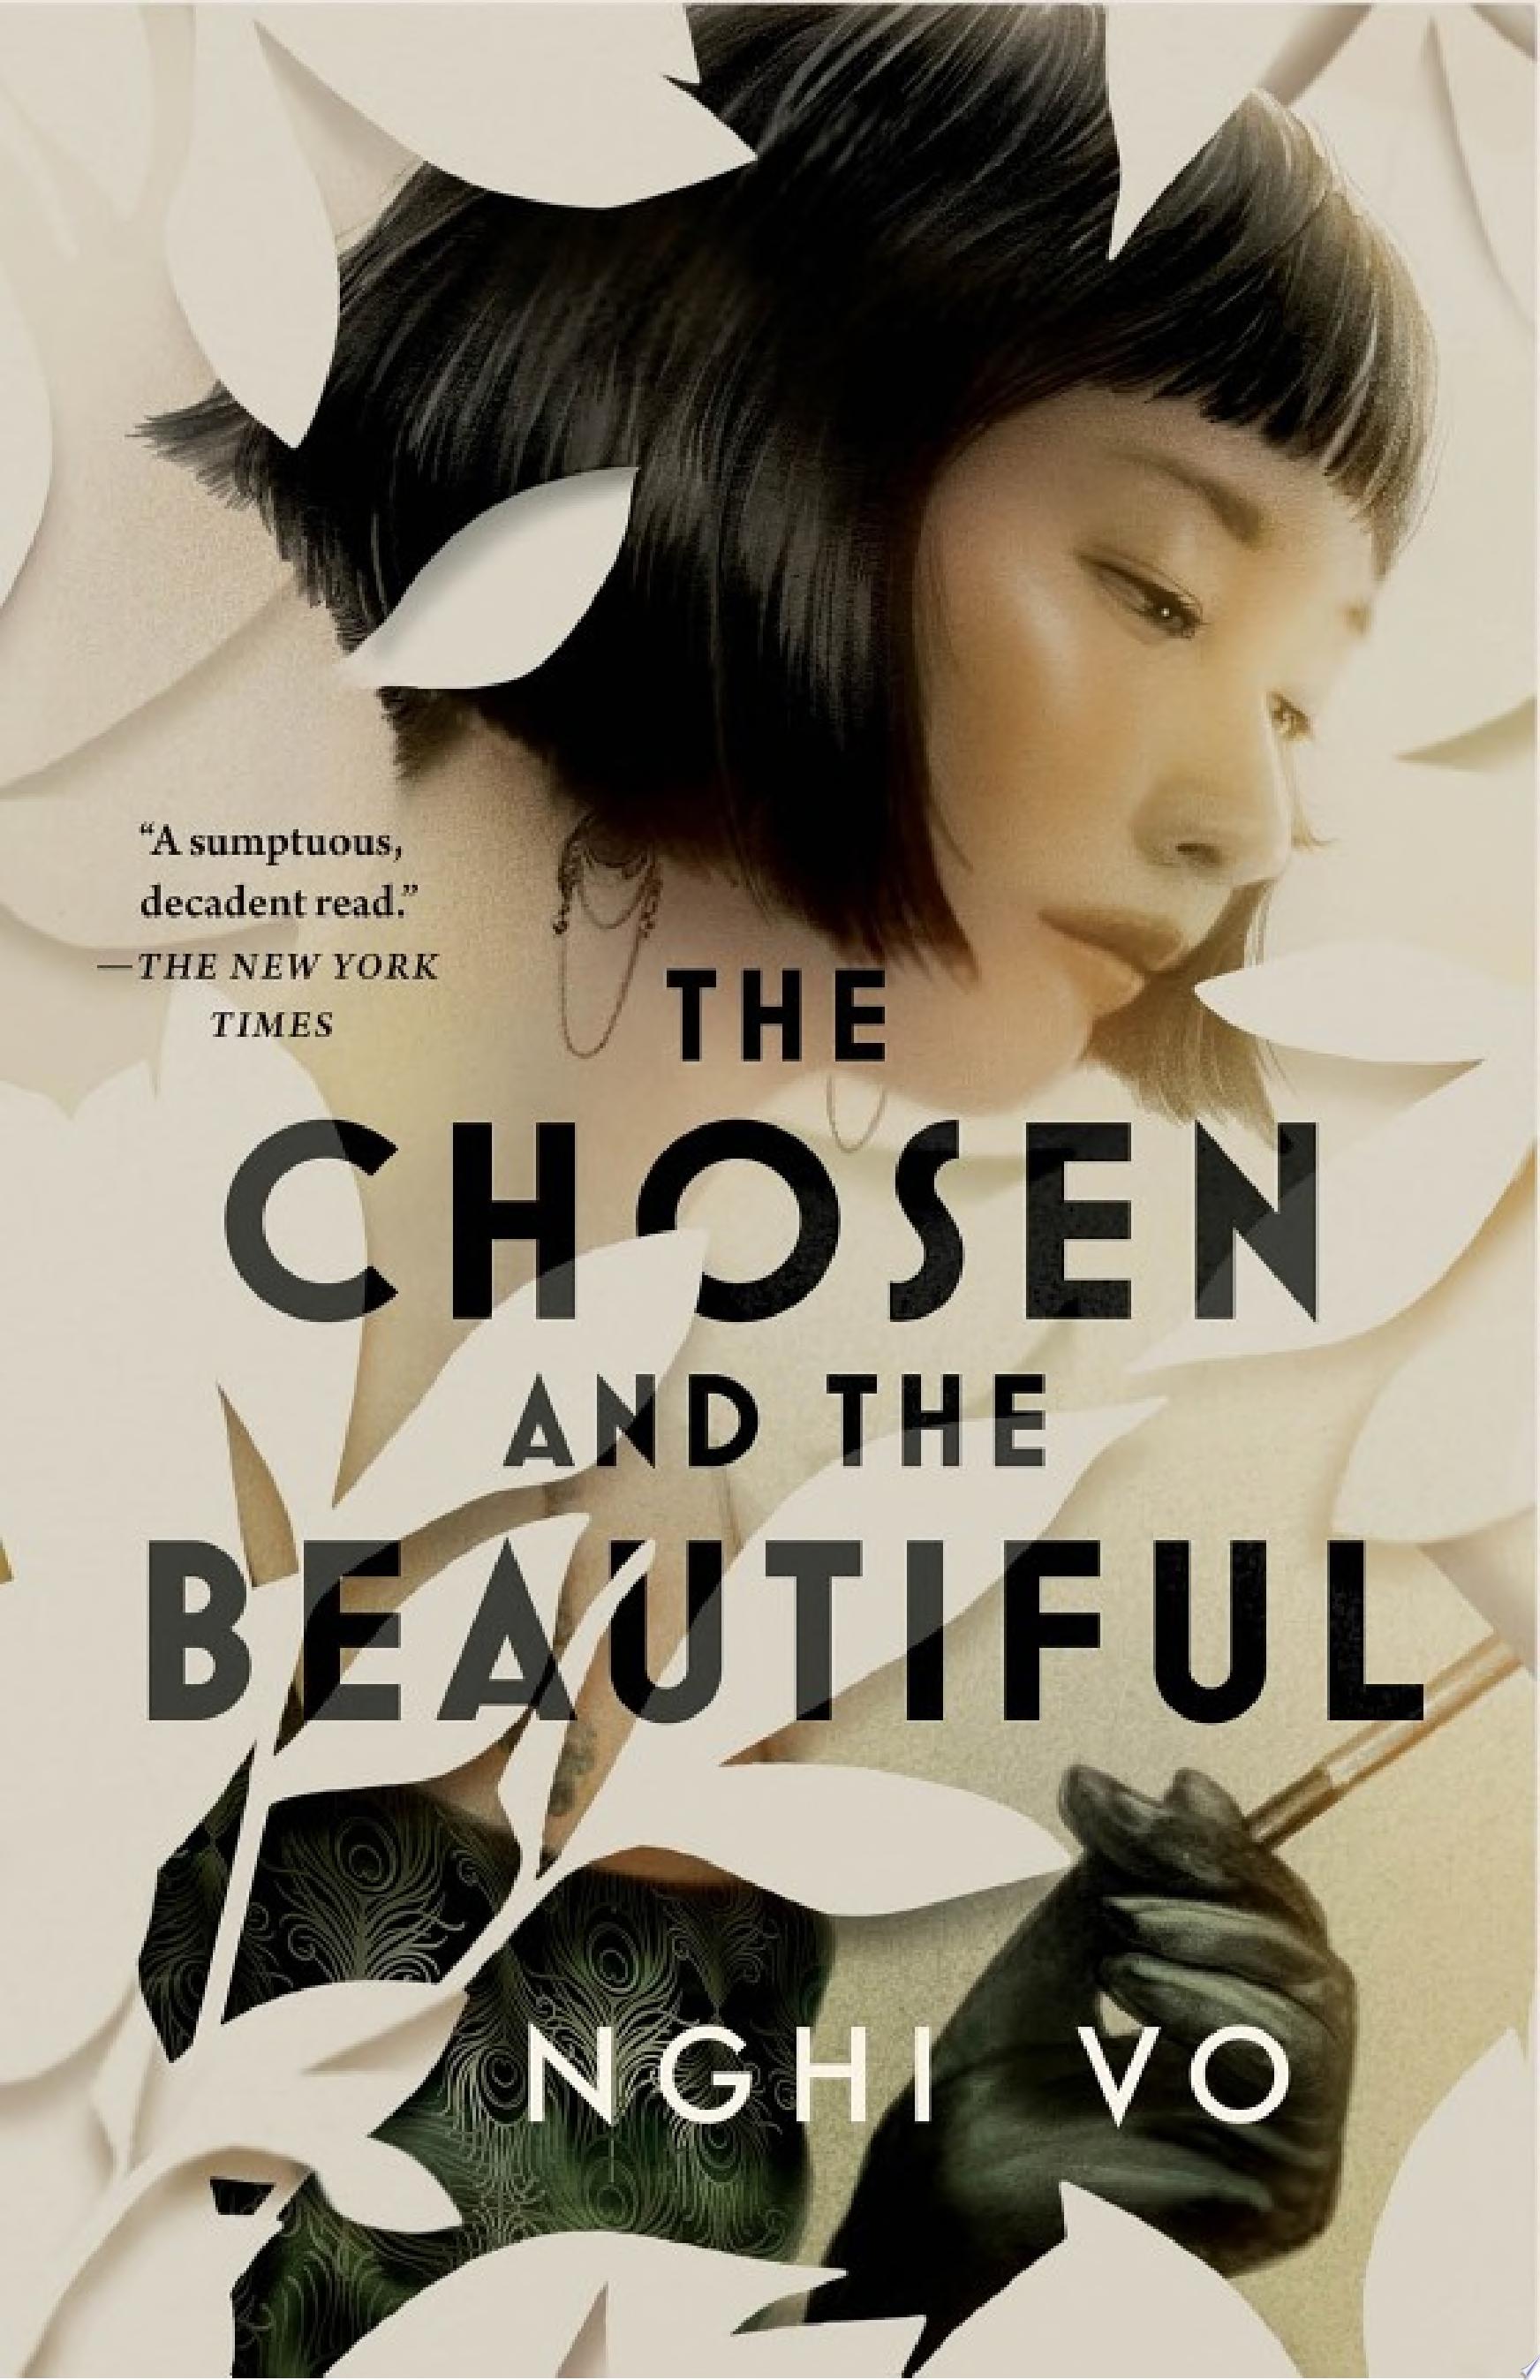 Image for "The Chosen and the Beautiful"